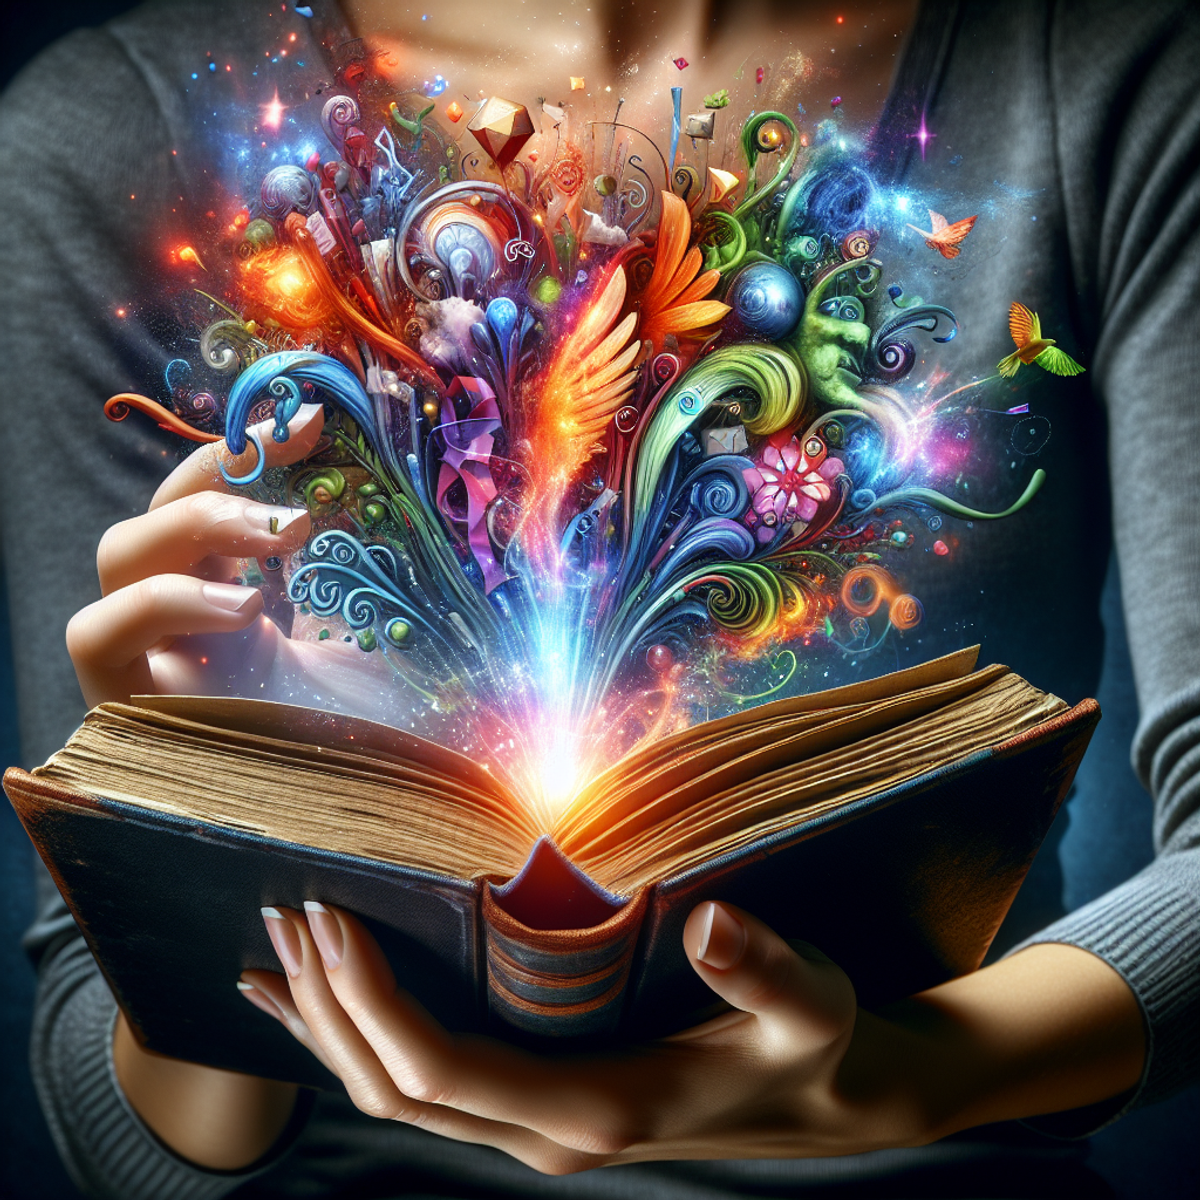 A woman's hand gripping a mystical book with abstract shapes and symbols emanating from its pages.